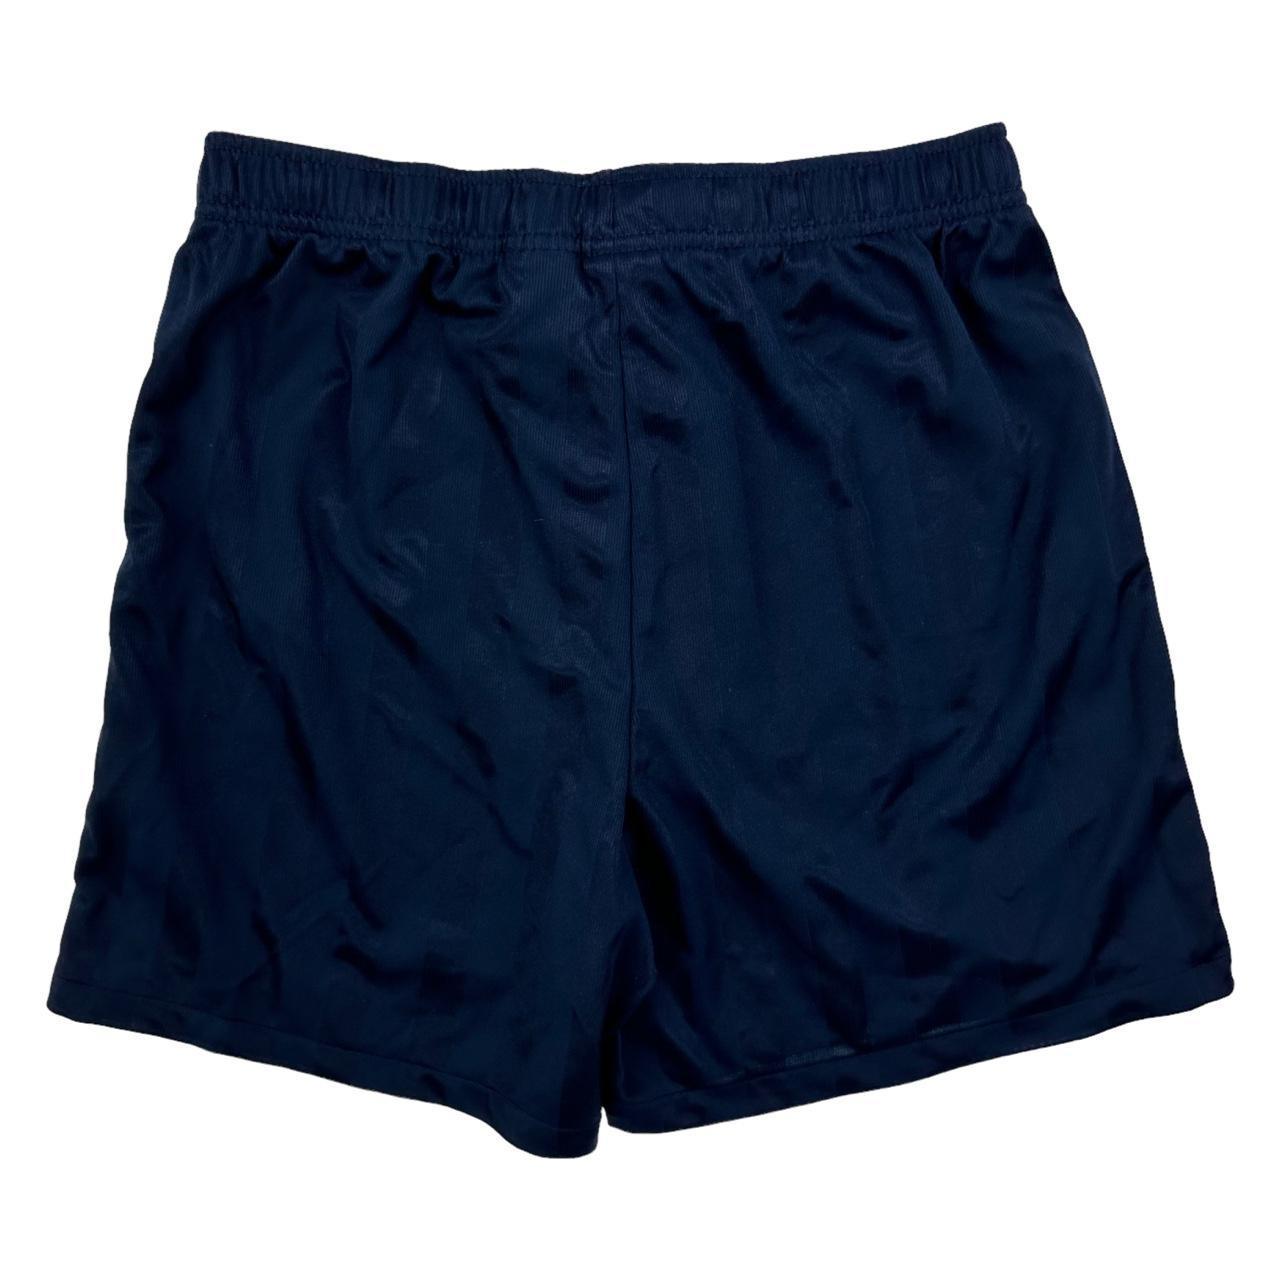 Nike Shorts W30 - Known Source